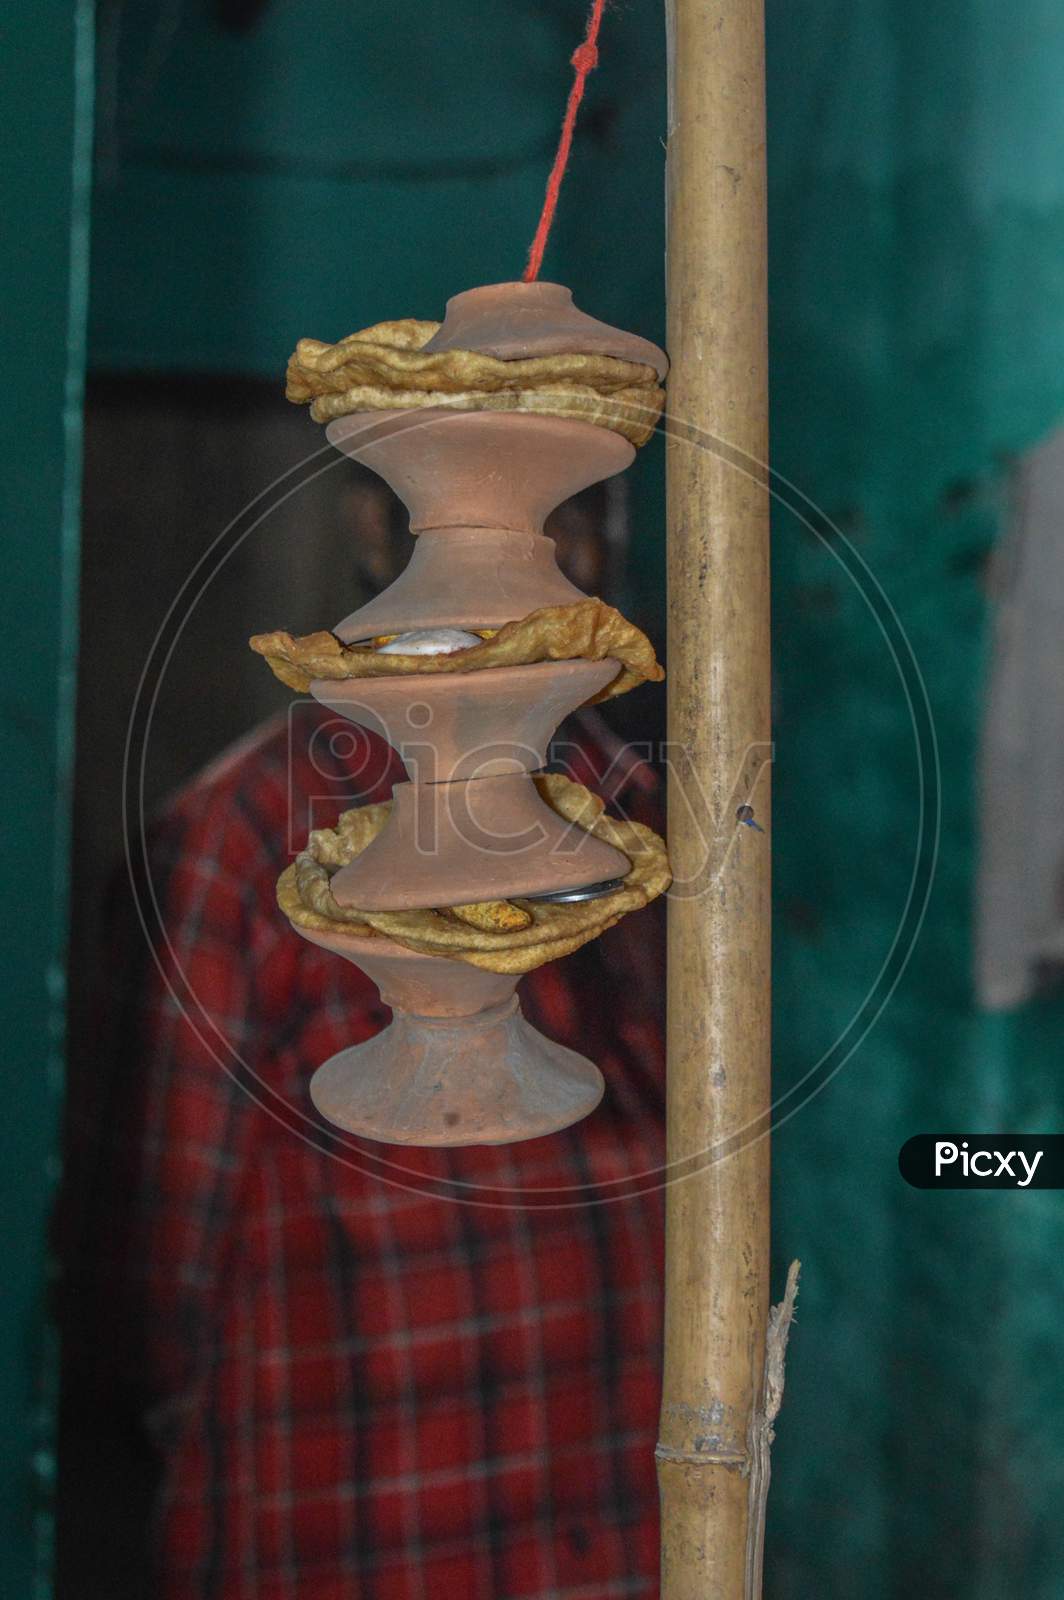 Clay Pot With Food Tie On Stick In Indian Weddings.